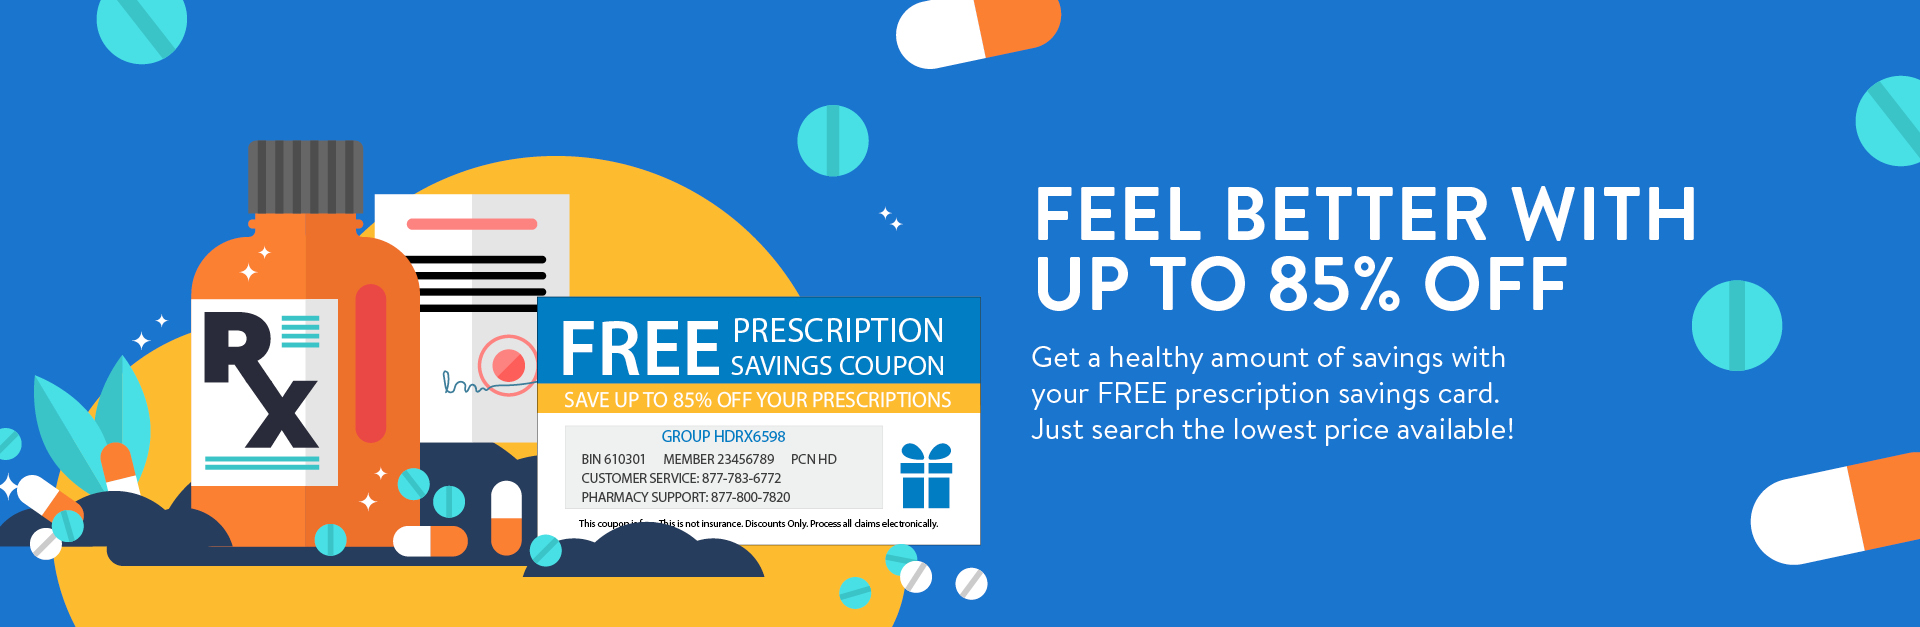 Start saving on your prescriptions today! Enjoy your free prescription savings card as one of your instant savings benefits by Rewards. It can be used by everyone in your household, including pets!